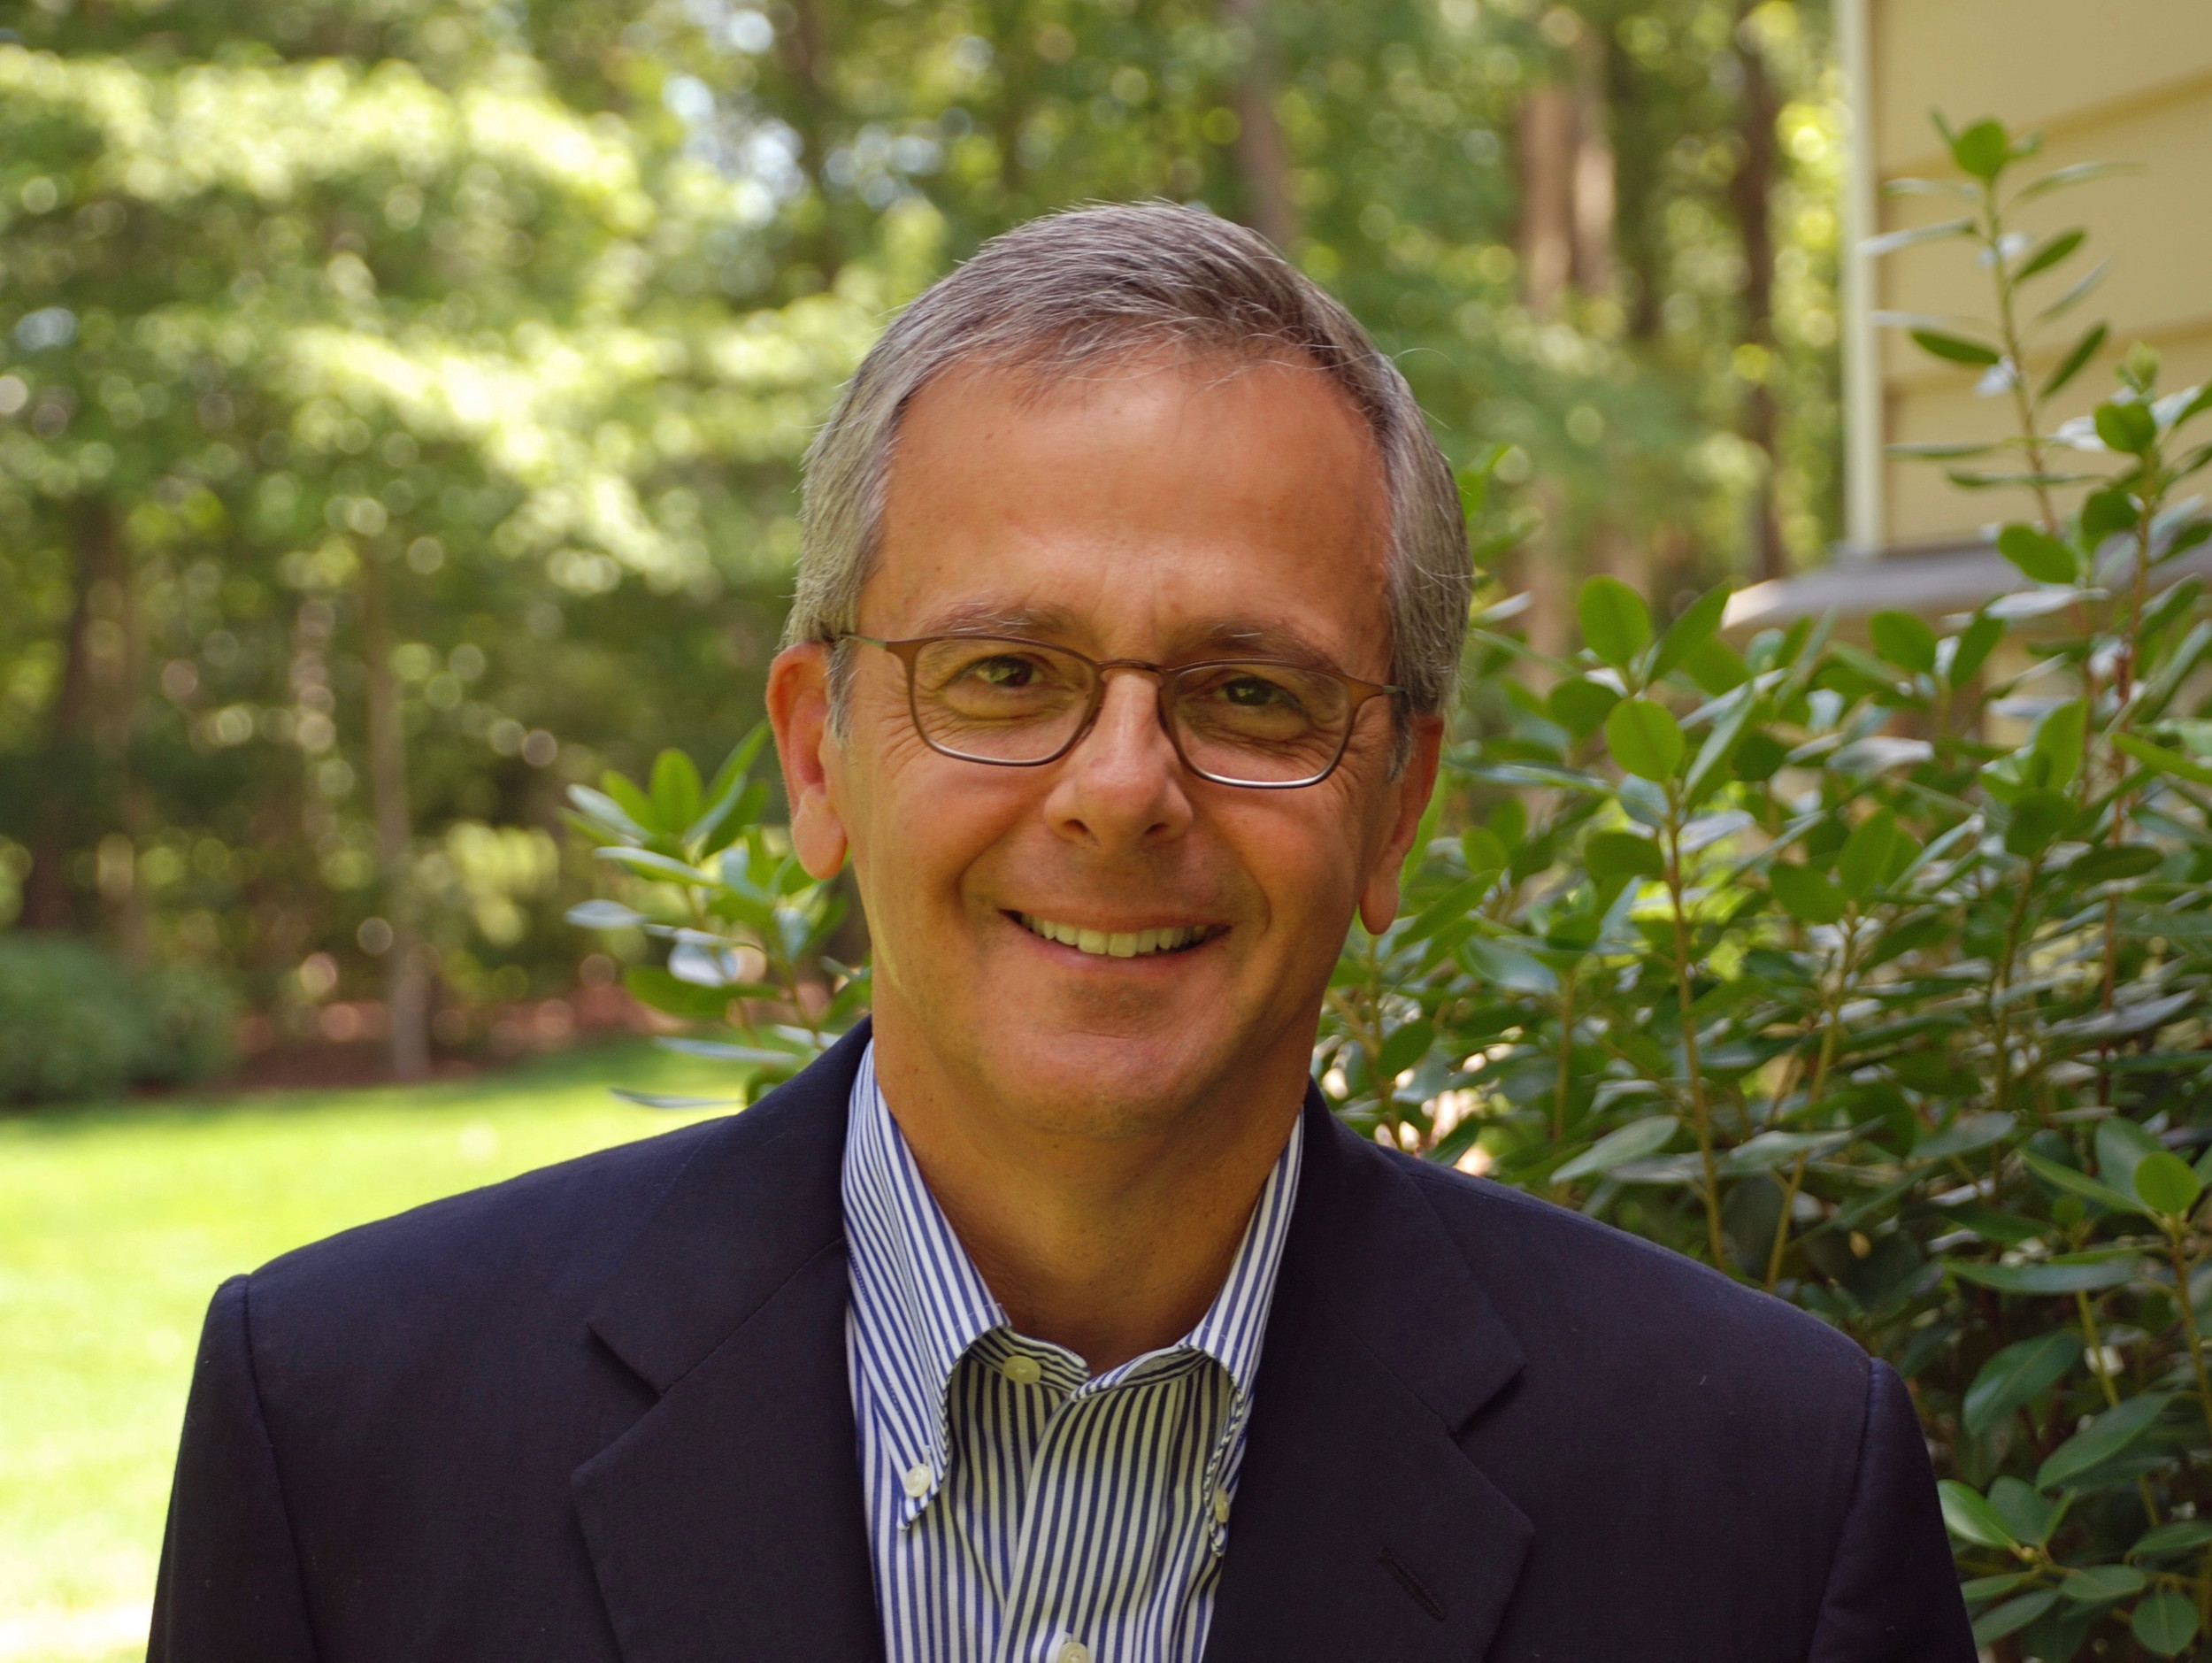 Author and sports writer Mike Lupica will speak to students at Hampden Meadows School in Barrington today.